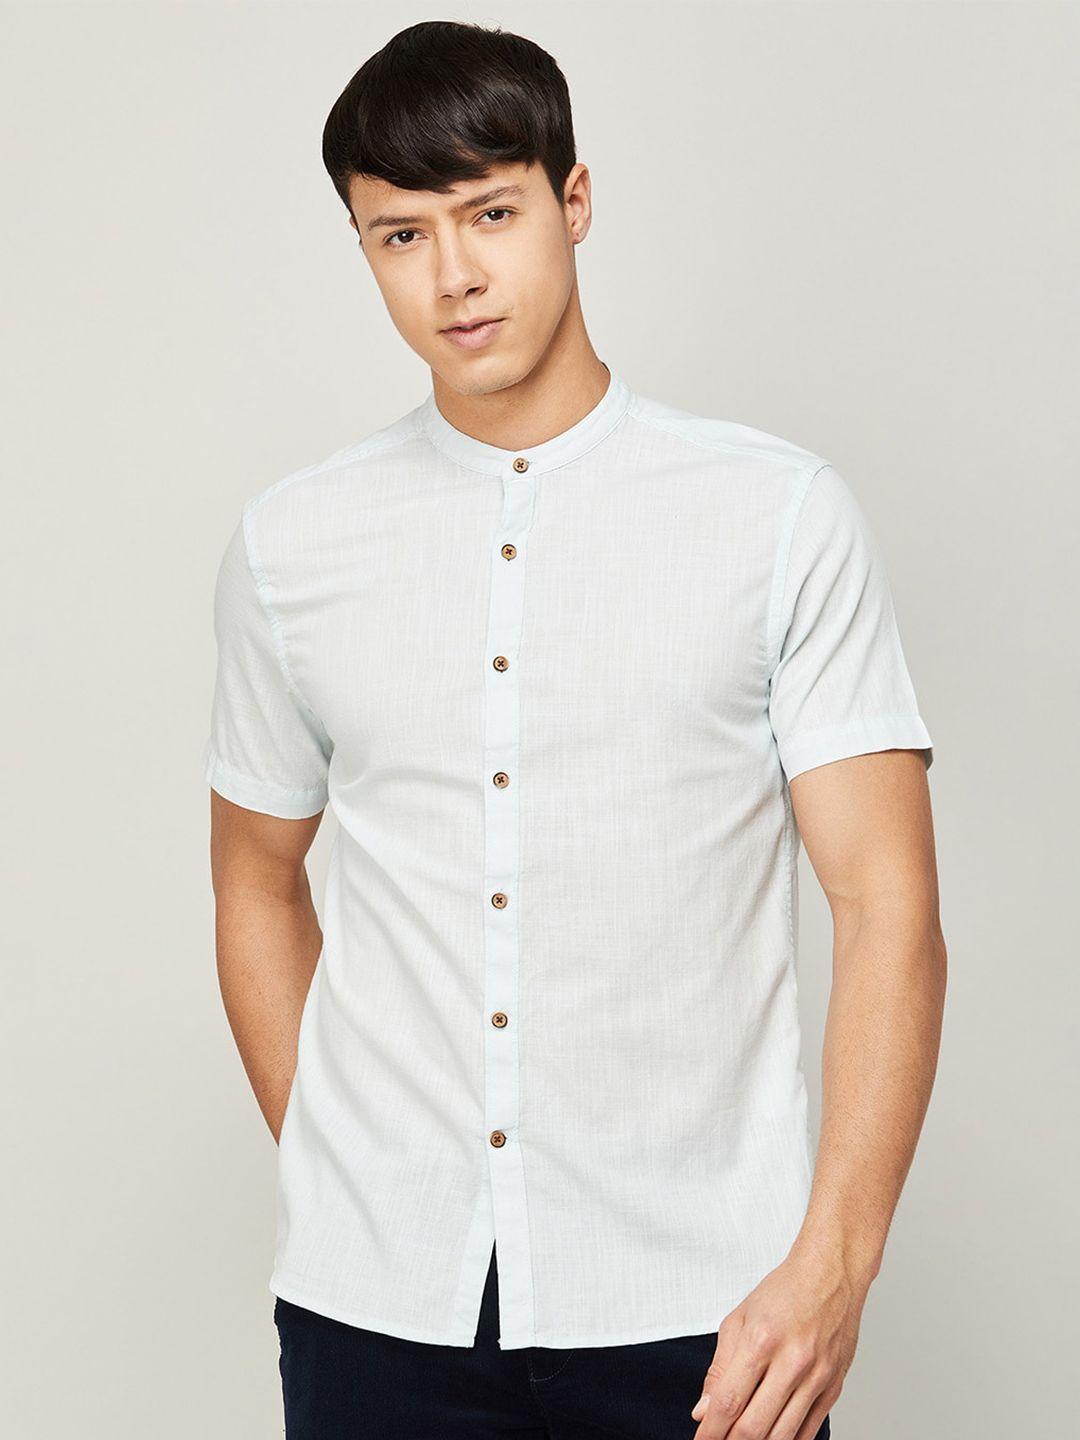 code by lifestyle men casual shirt